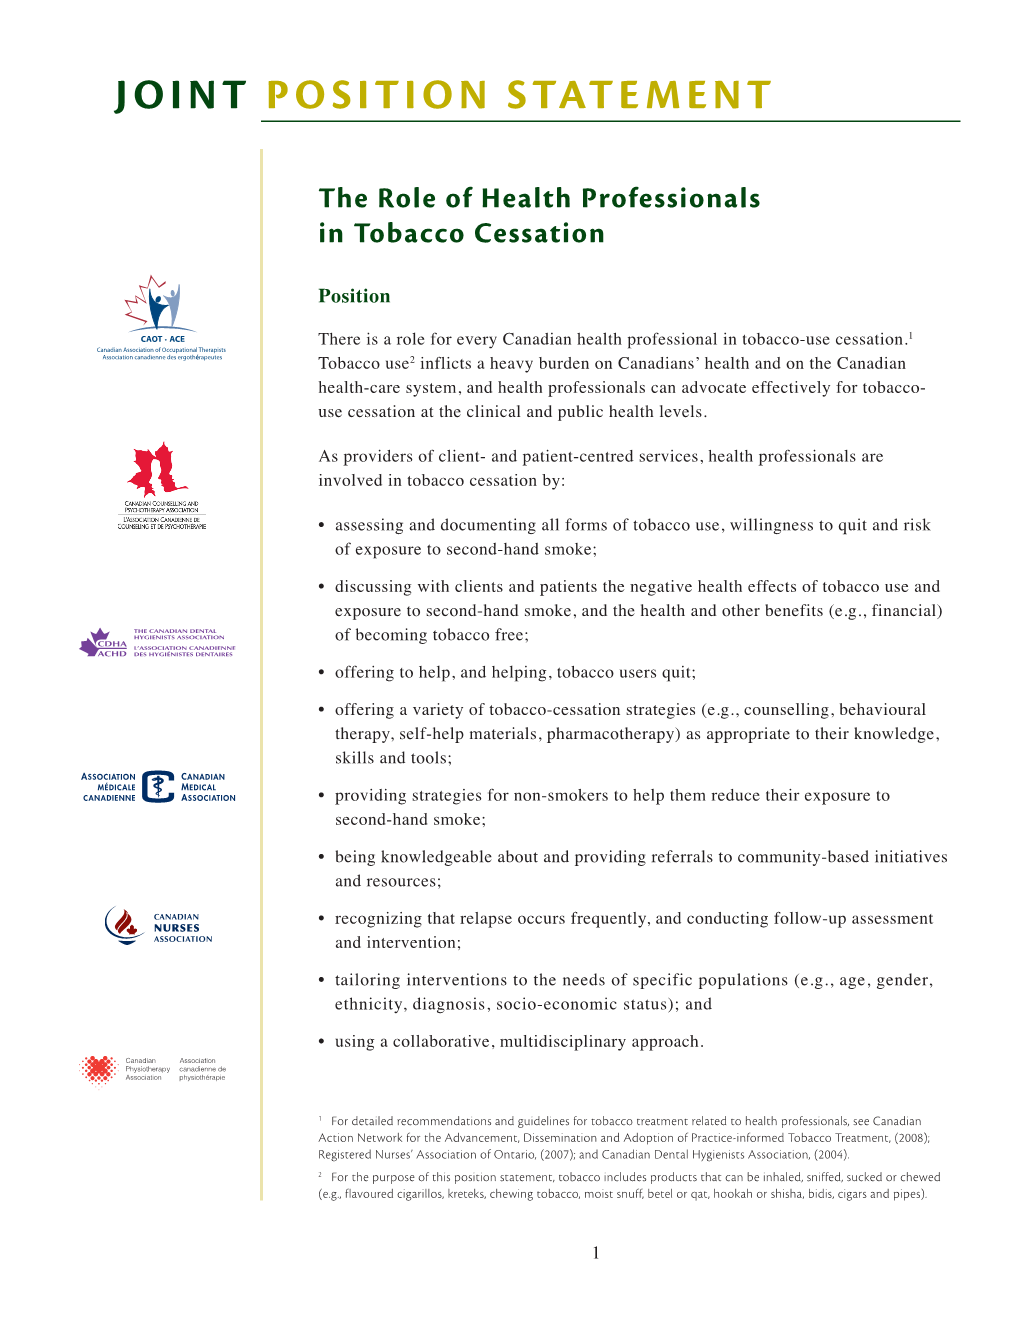 The Role of Health Professionals in Tobacco Cessation